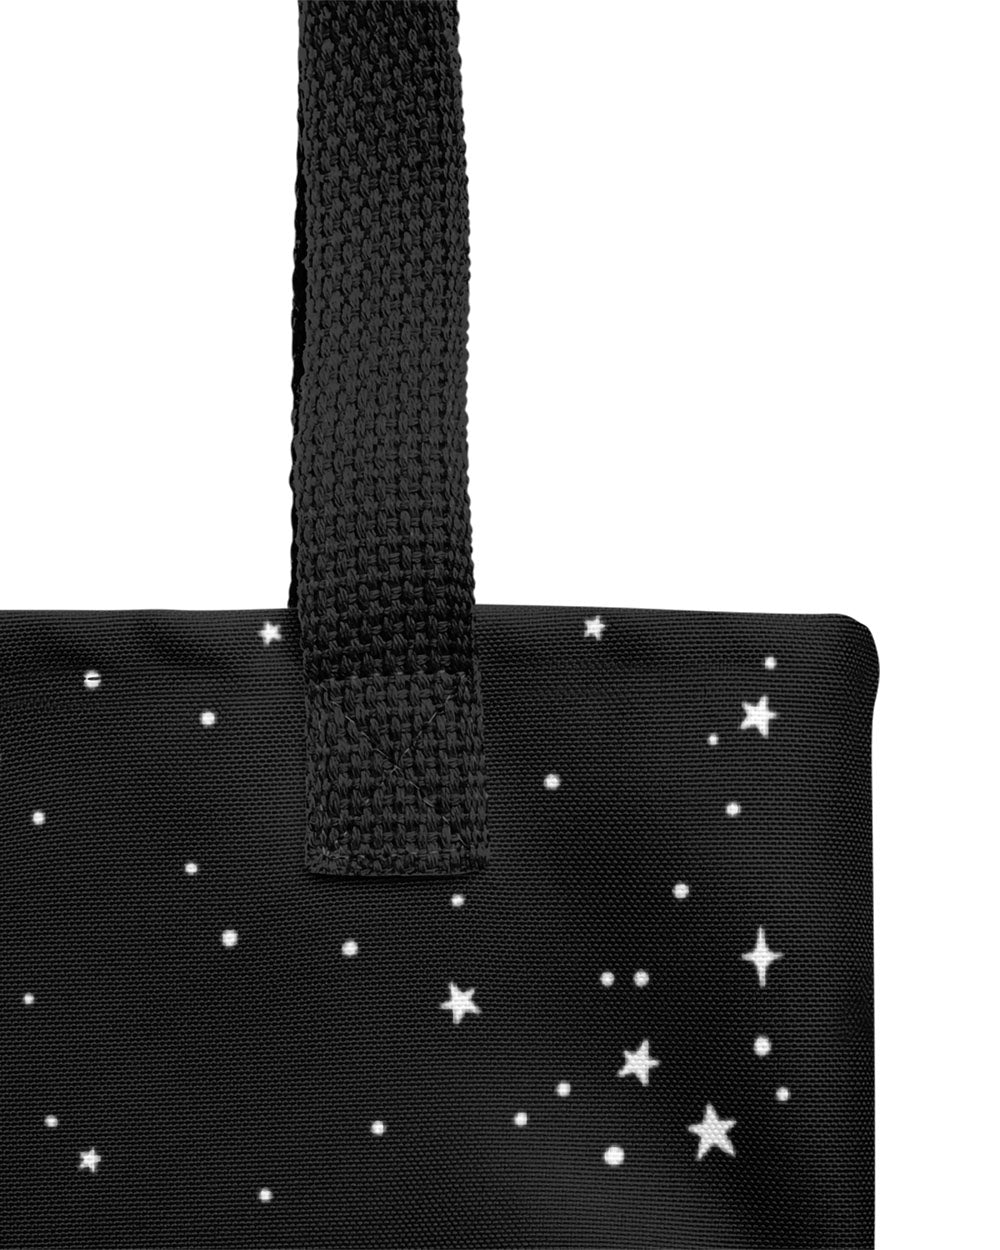 Astral Tote Bag - Large Foldable Bag for Work Gym Travel Shopping & Grocery Goth Accessories Dark Academia